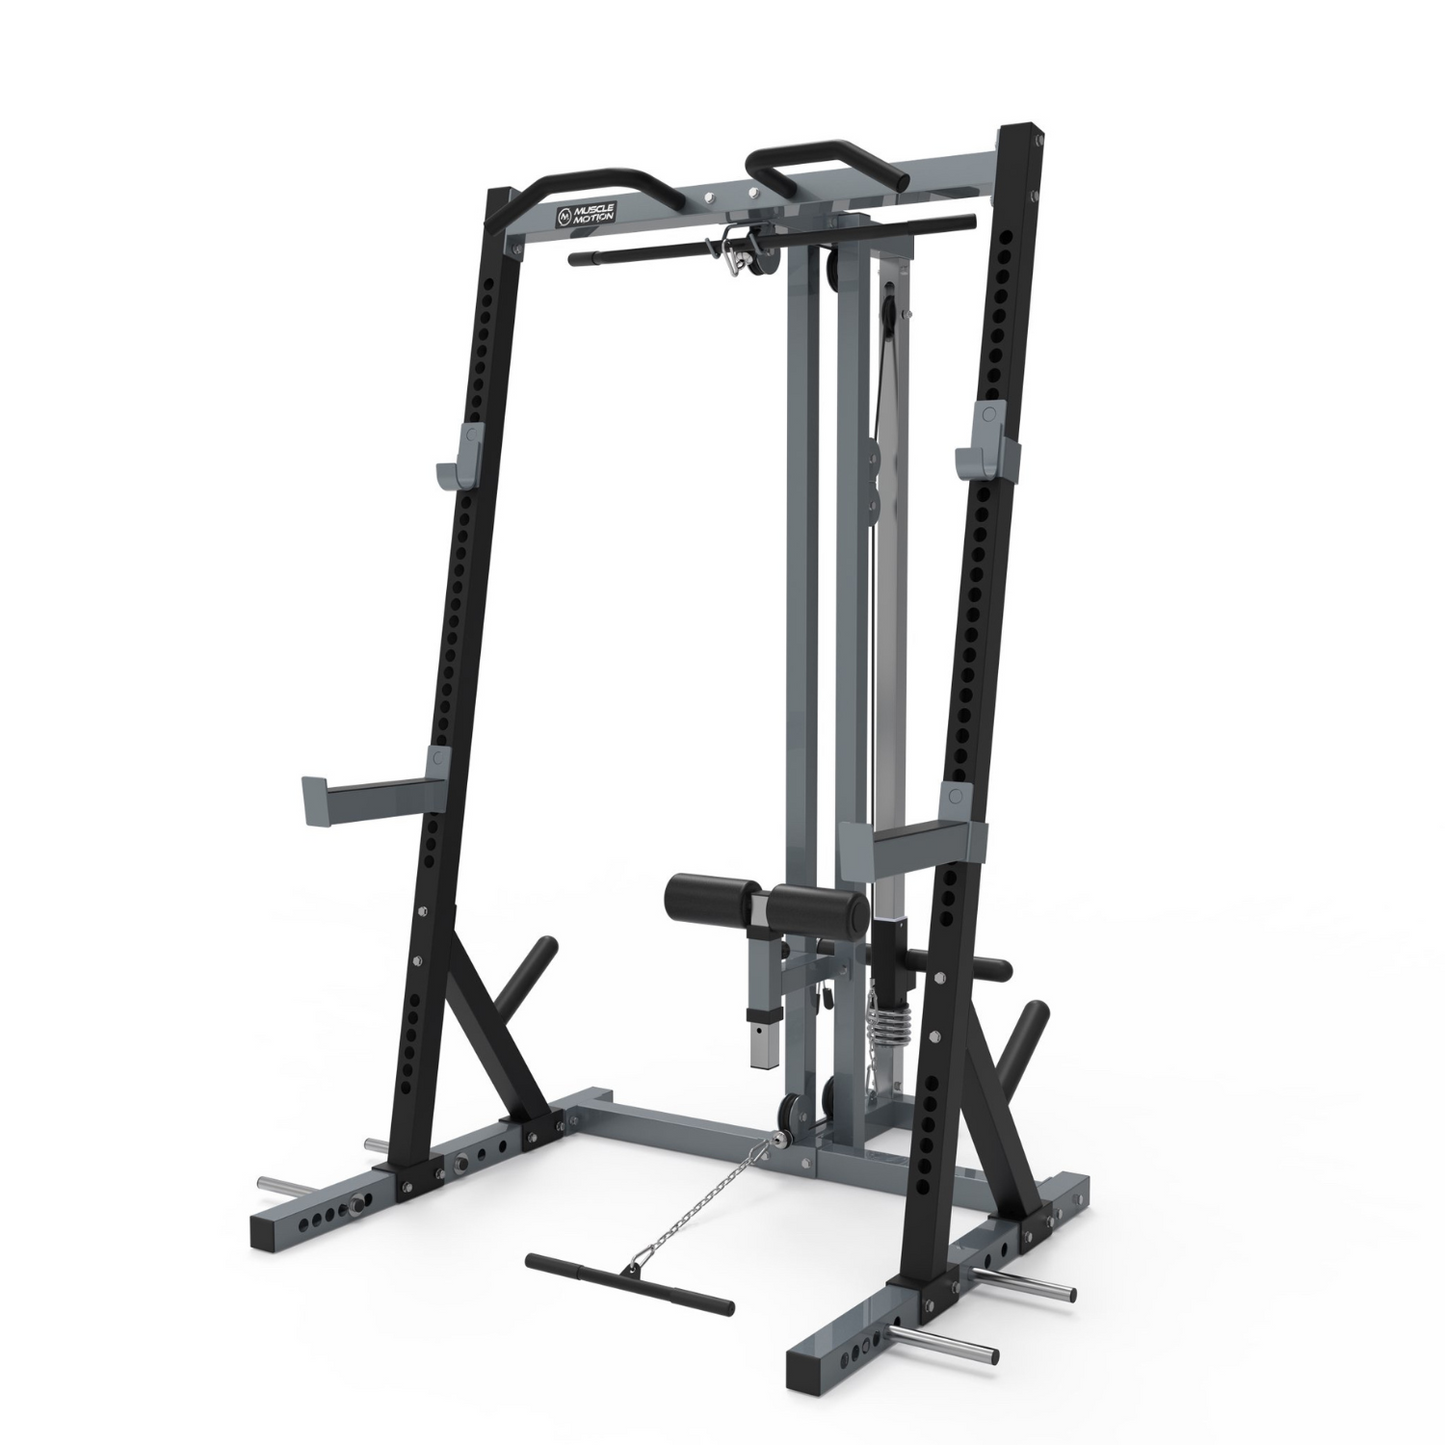 Muscle Motion Package Deal - HR1001 Half Rack & High Low Pulley, Adjustable Bench, Olympic Bar and 105kg Olympic Weights